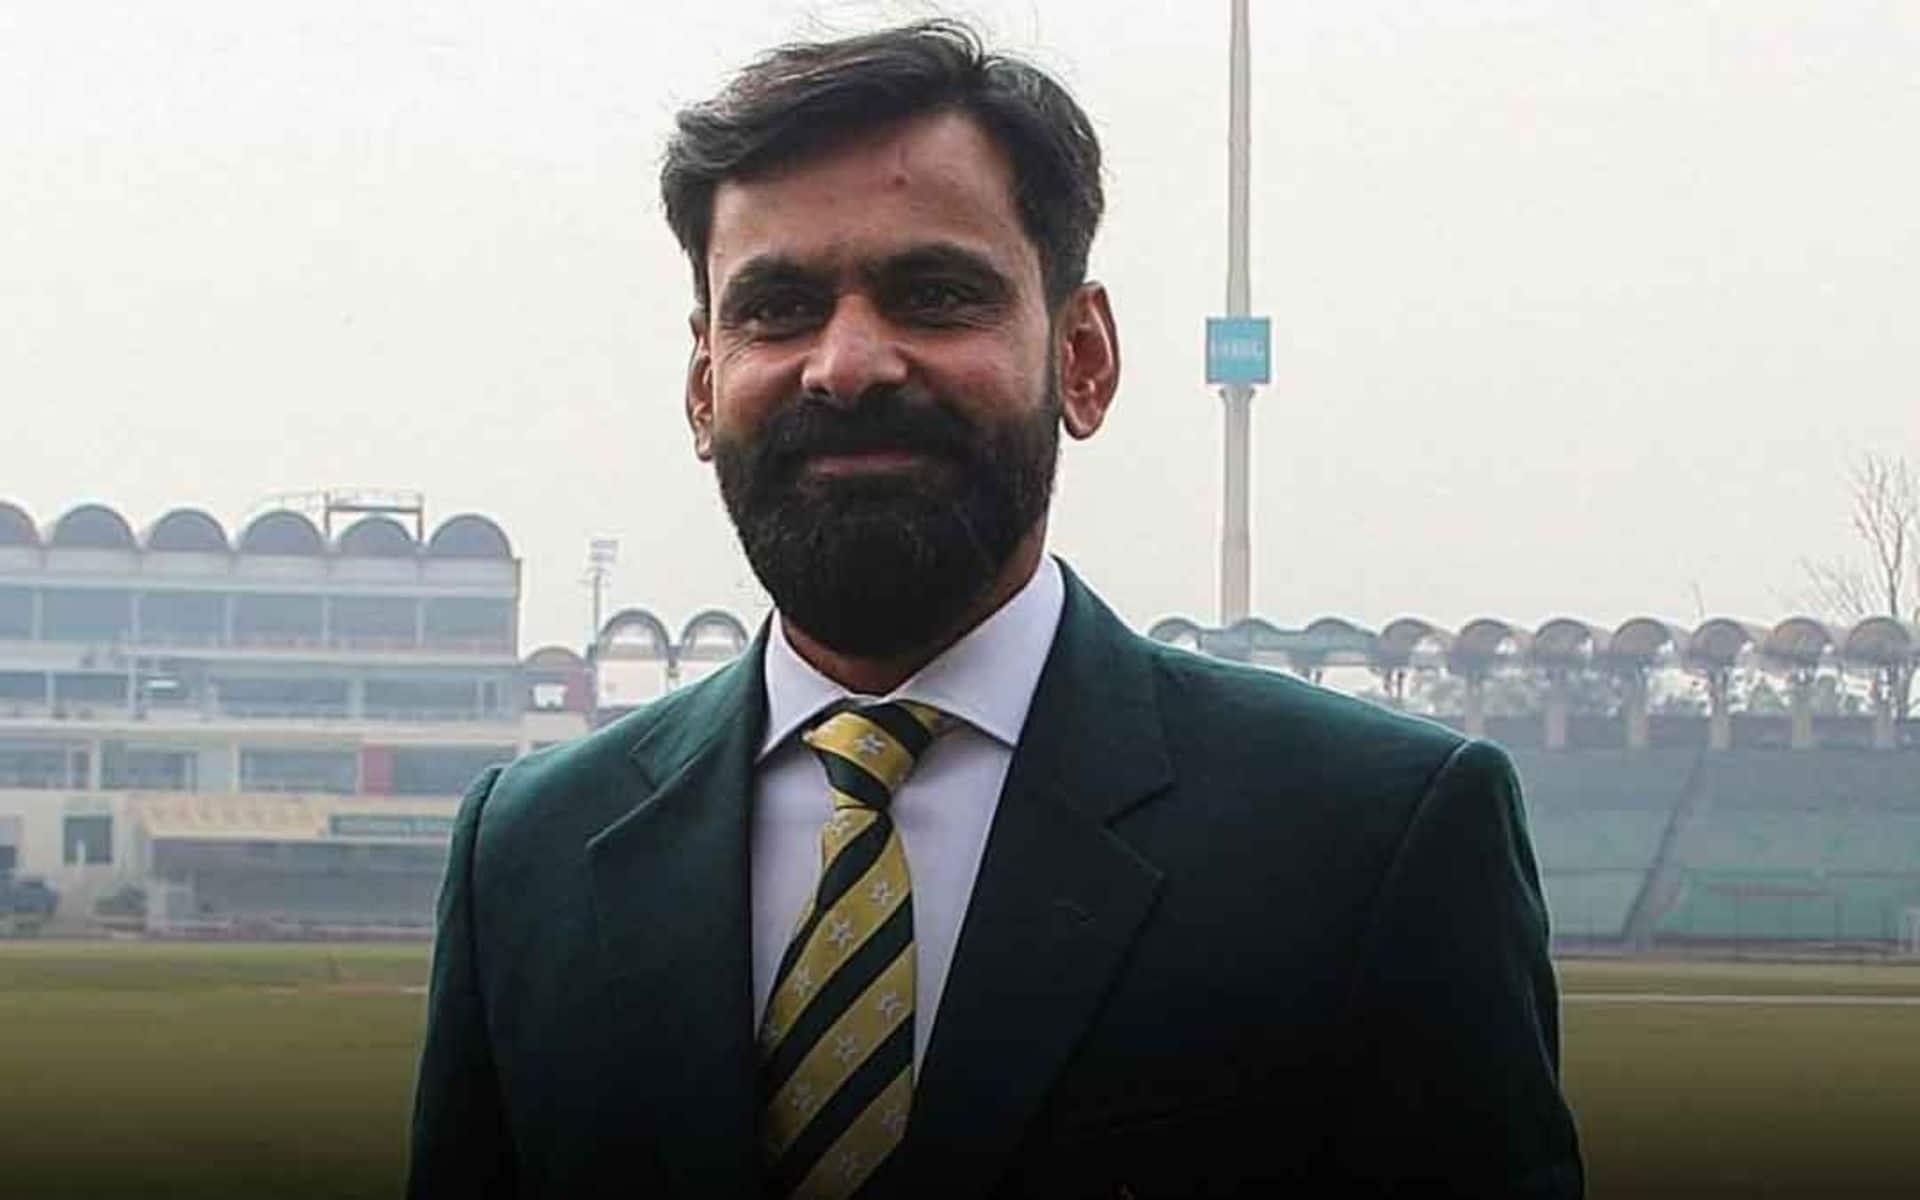 Hafeez served as Pakistan's Director of Cricket for two months (x.com)